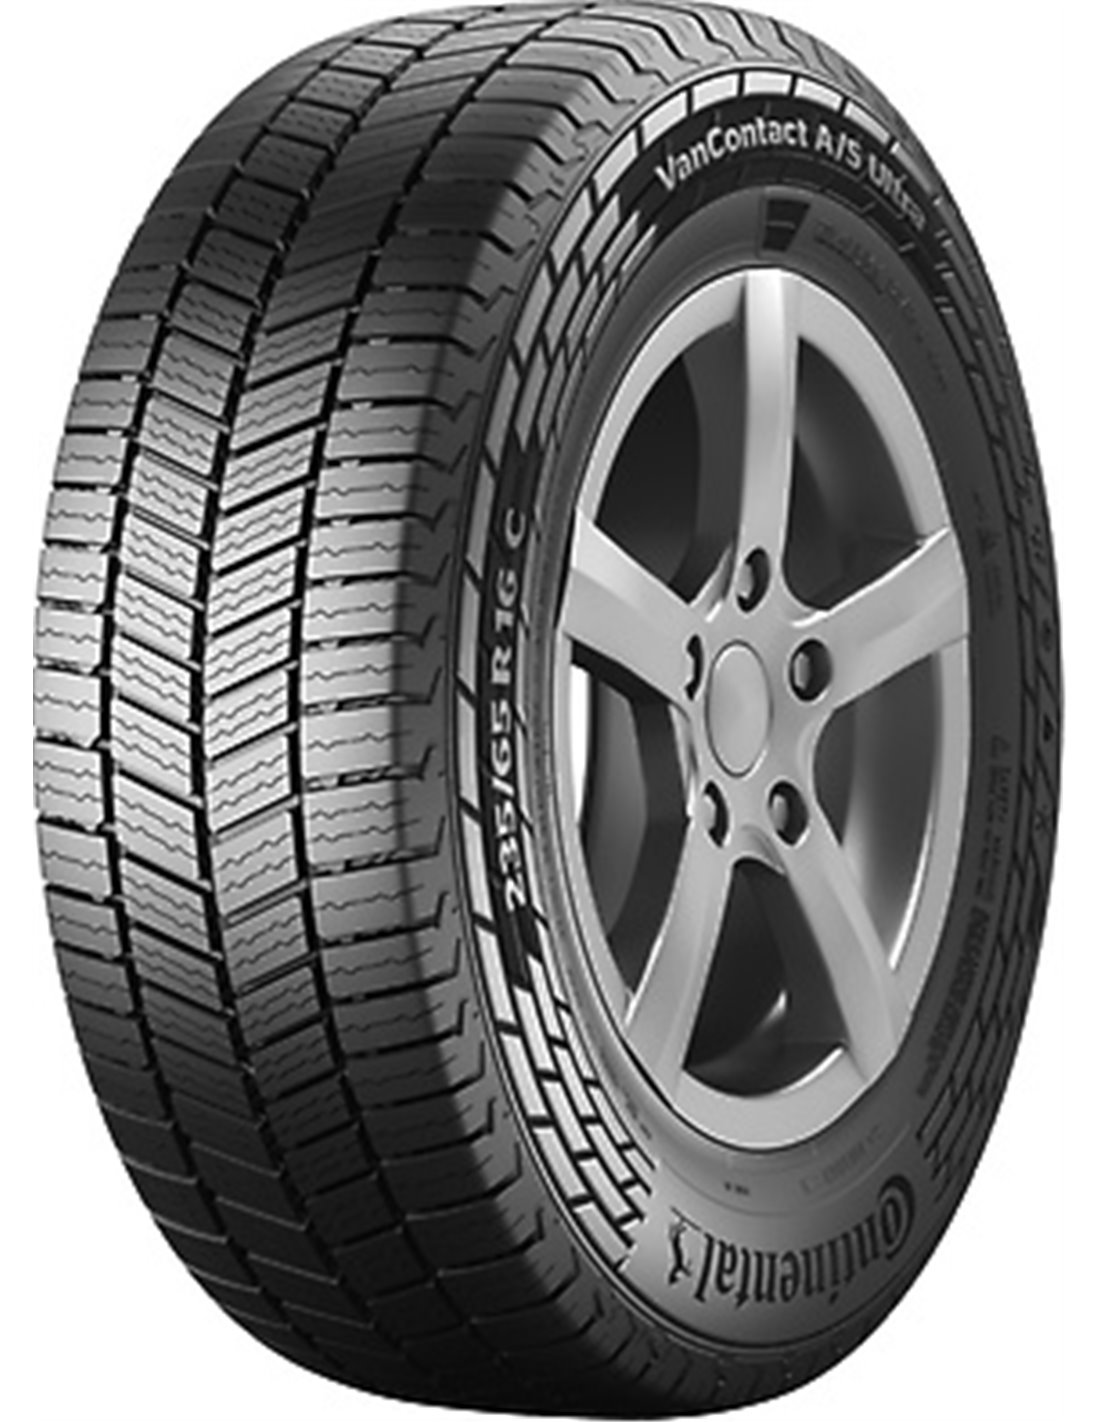 CONTINENTAL VANCONTACT AS ULTRA 215/70 R15C 109/107S